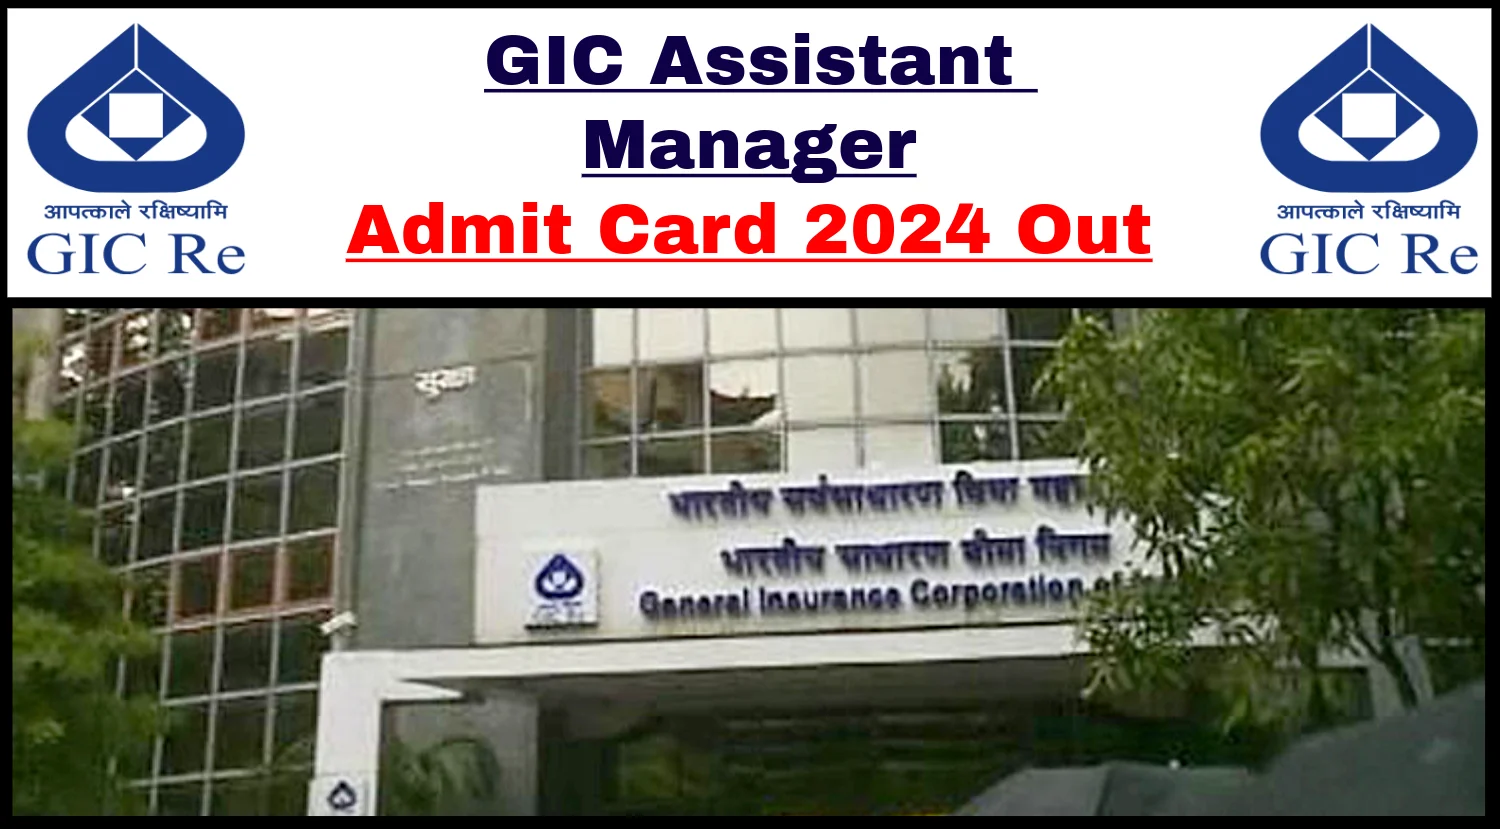 GIC Assistant Manager Admit Card 2024 Out, Download GIC Re Hall Ticket Now